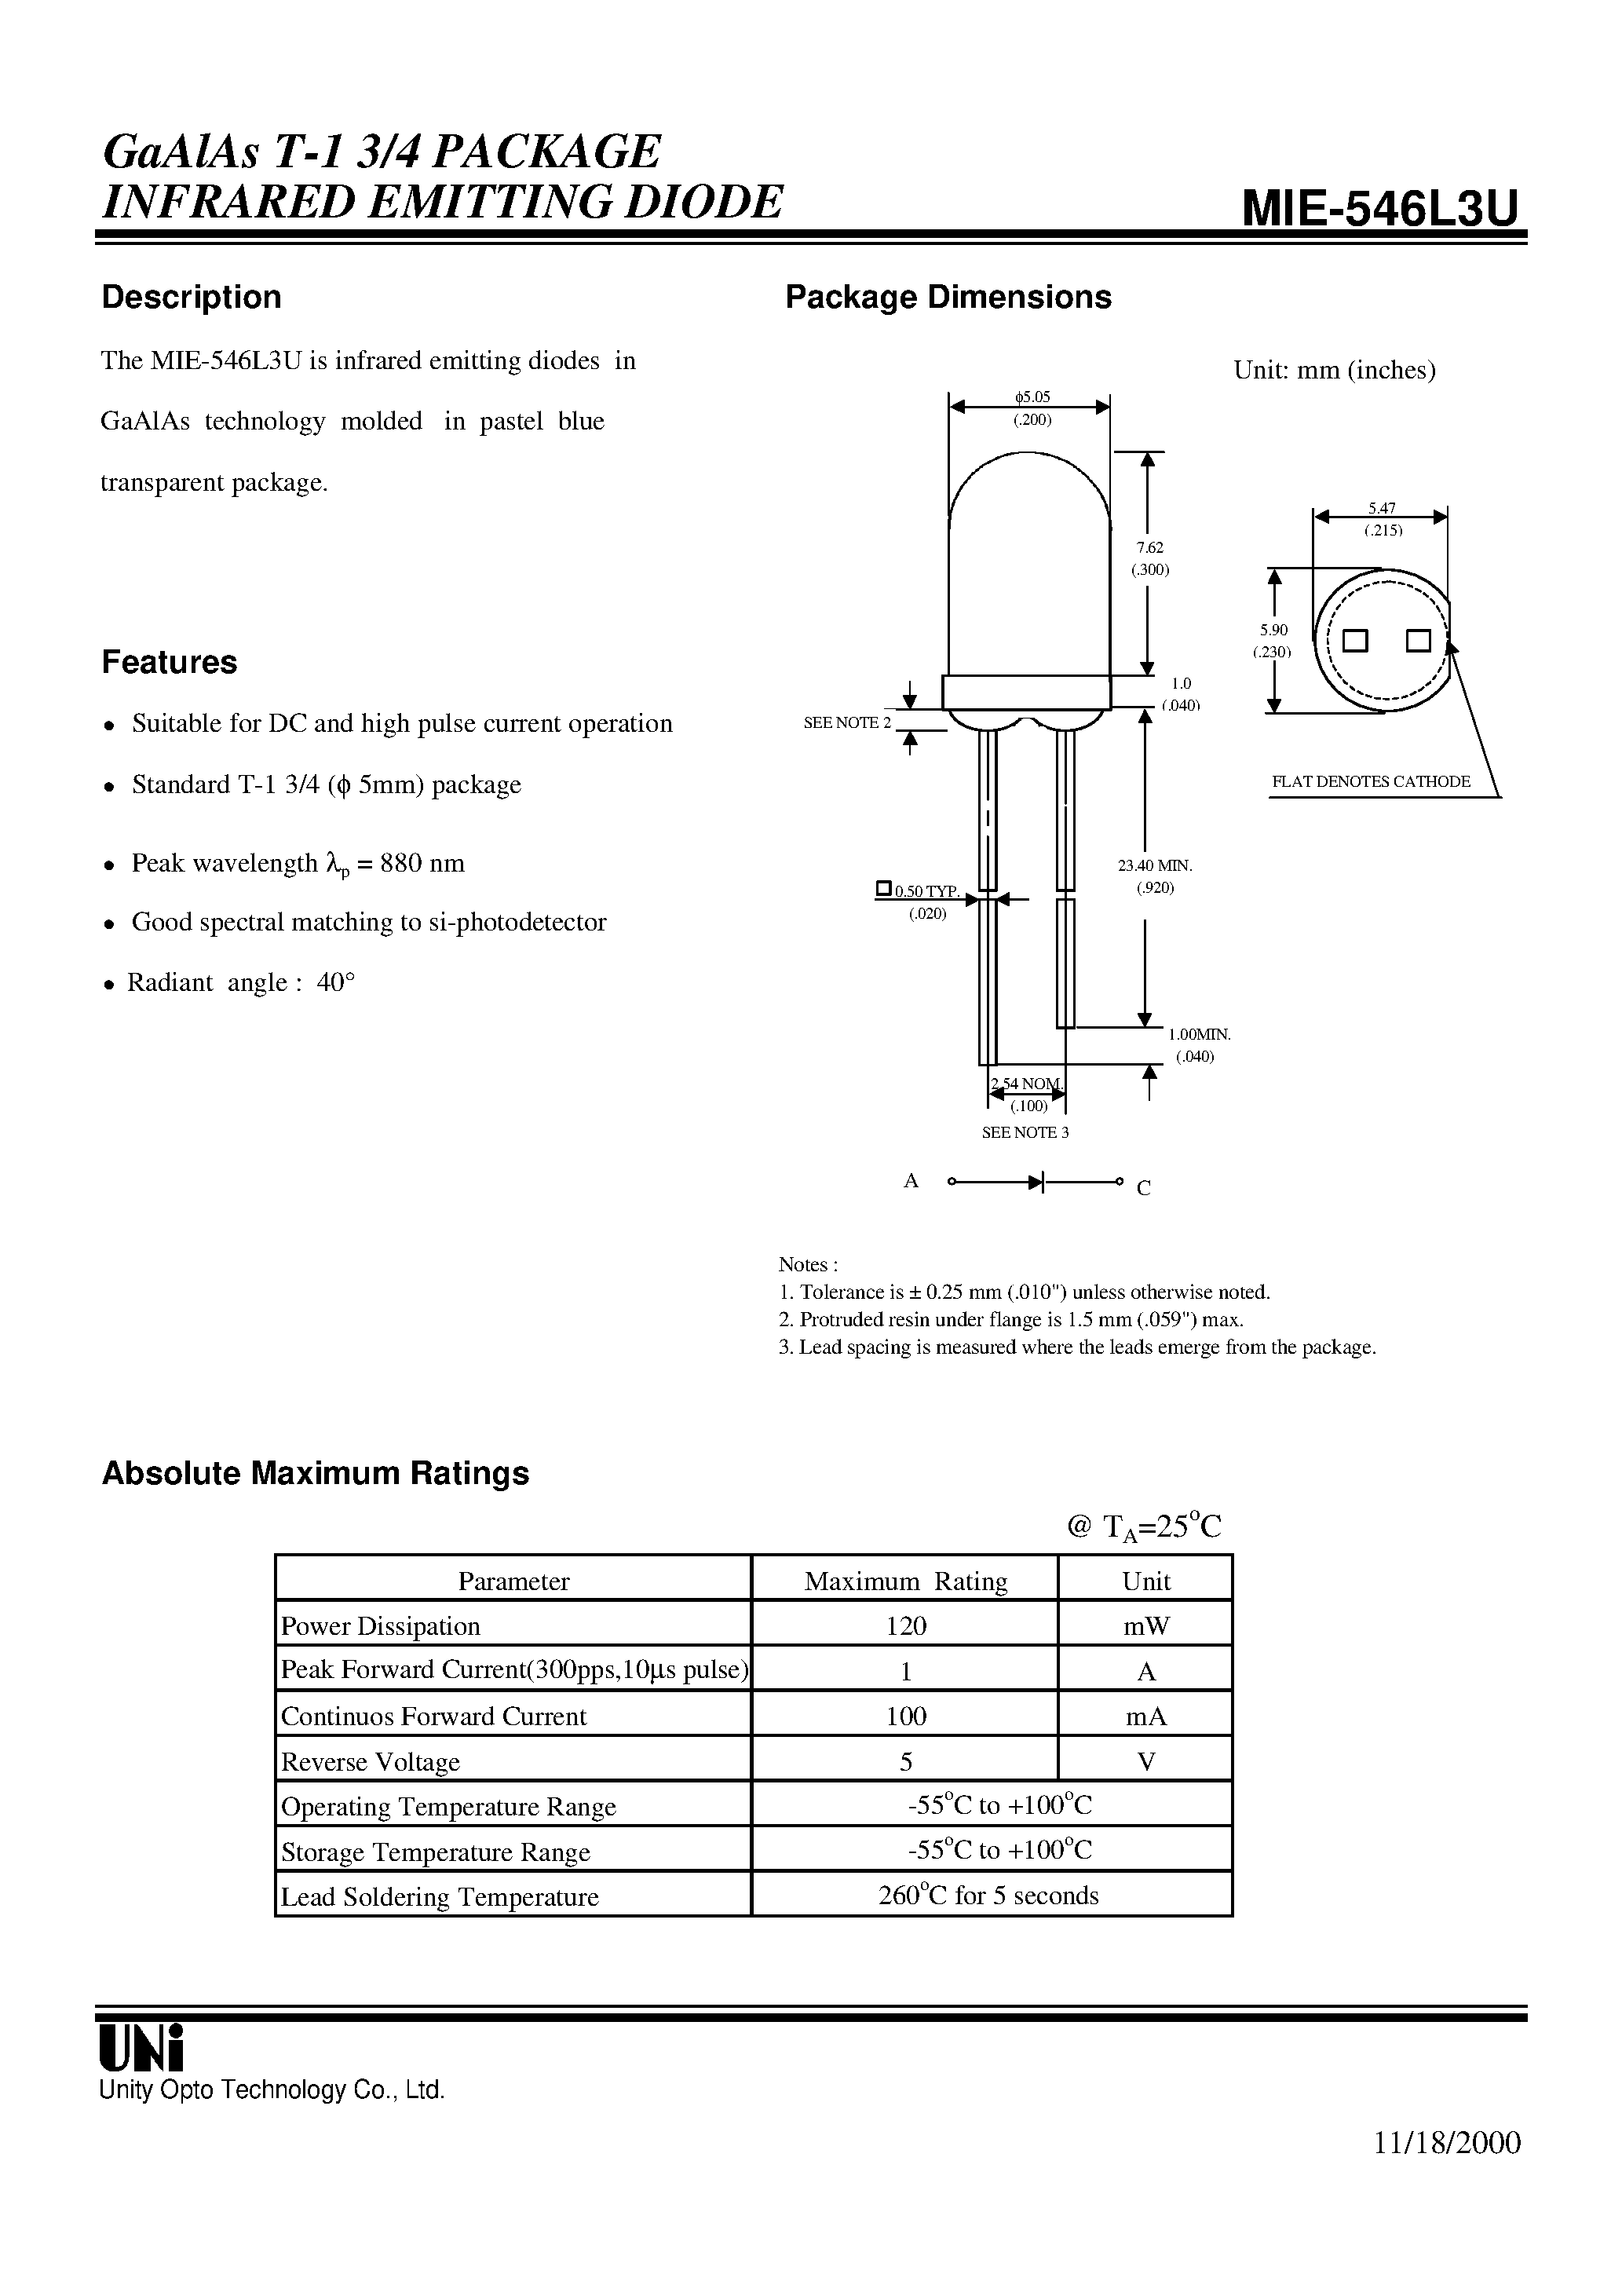 Datasheet MIE-546L3U - GaAlAs T-1 3/4 PACKAGE INFRARED EMITTING DIODE page 1